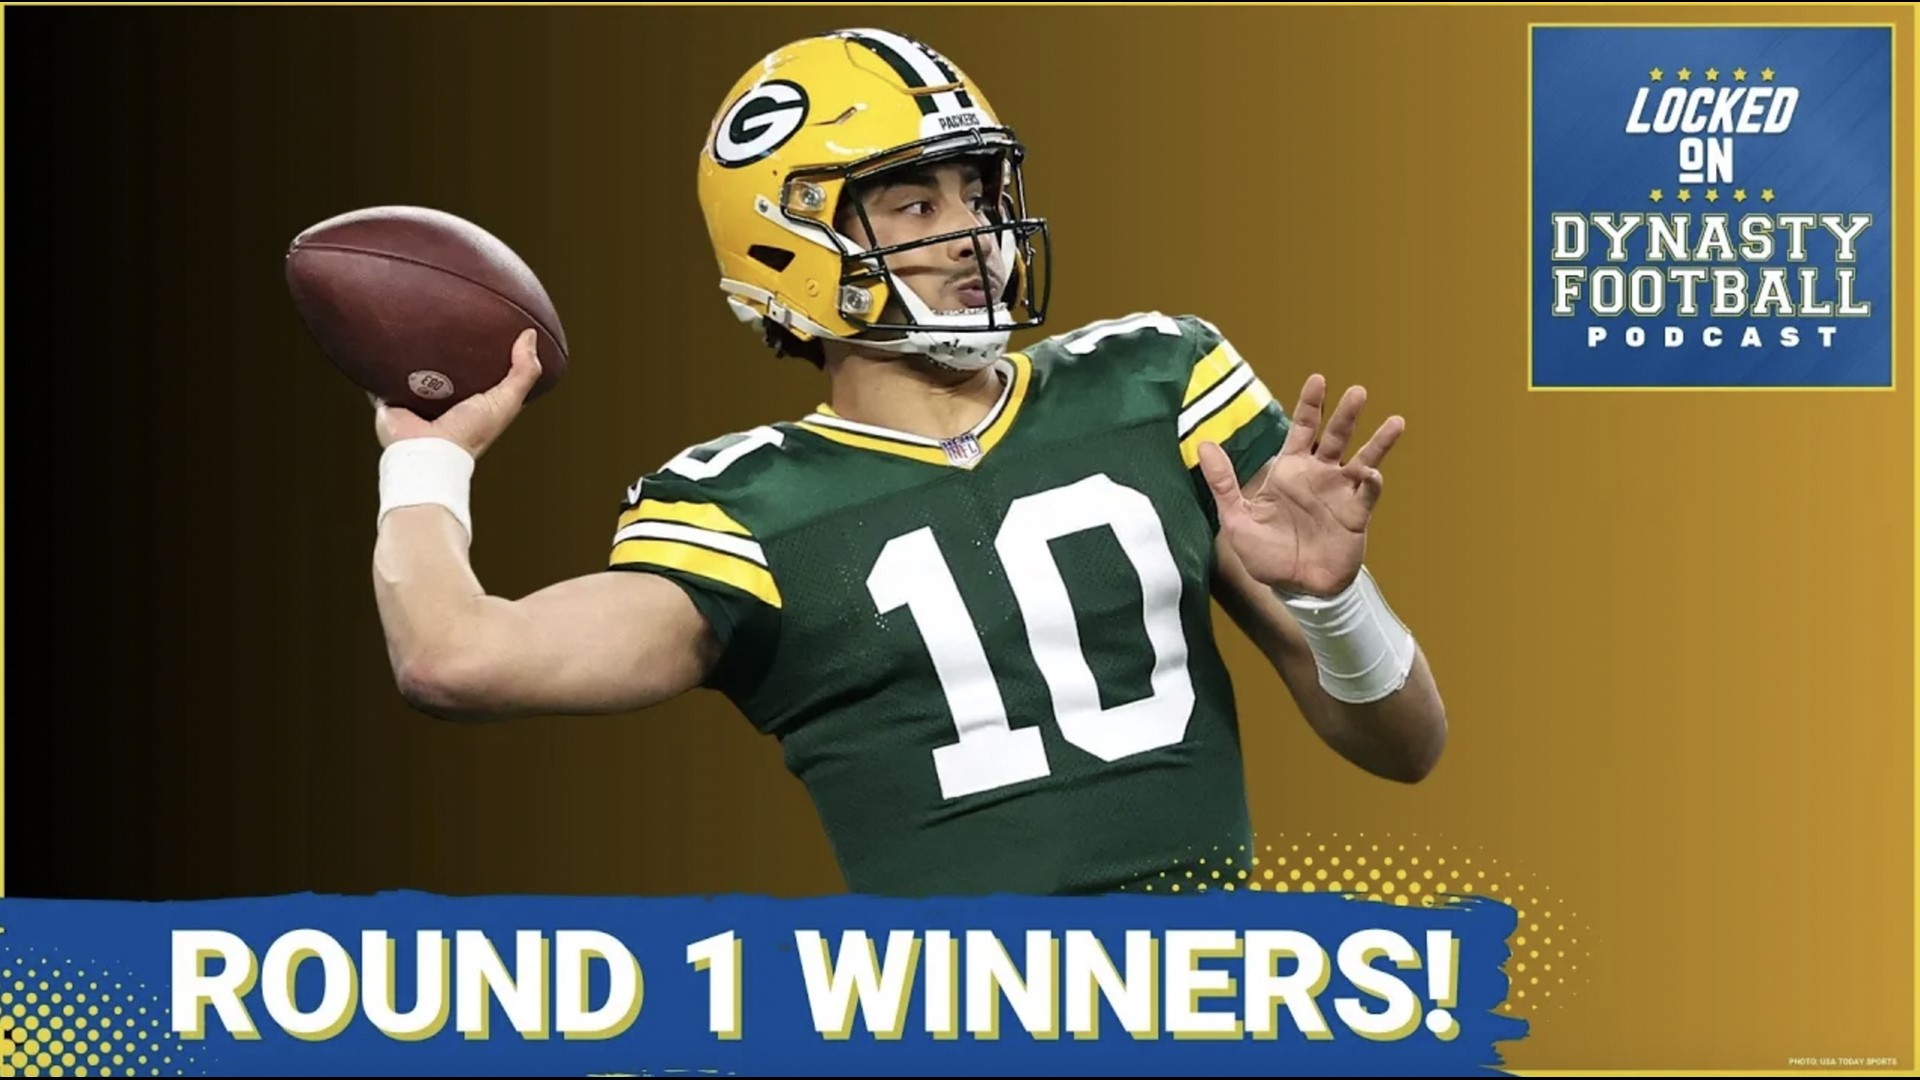 Green Bay Packers QB Jordan Love had a huge performance in his first career playoff game. How much will the win over the Cowboys impact his dynasty value?